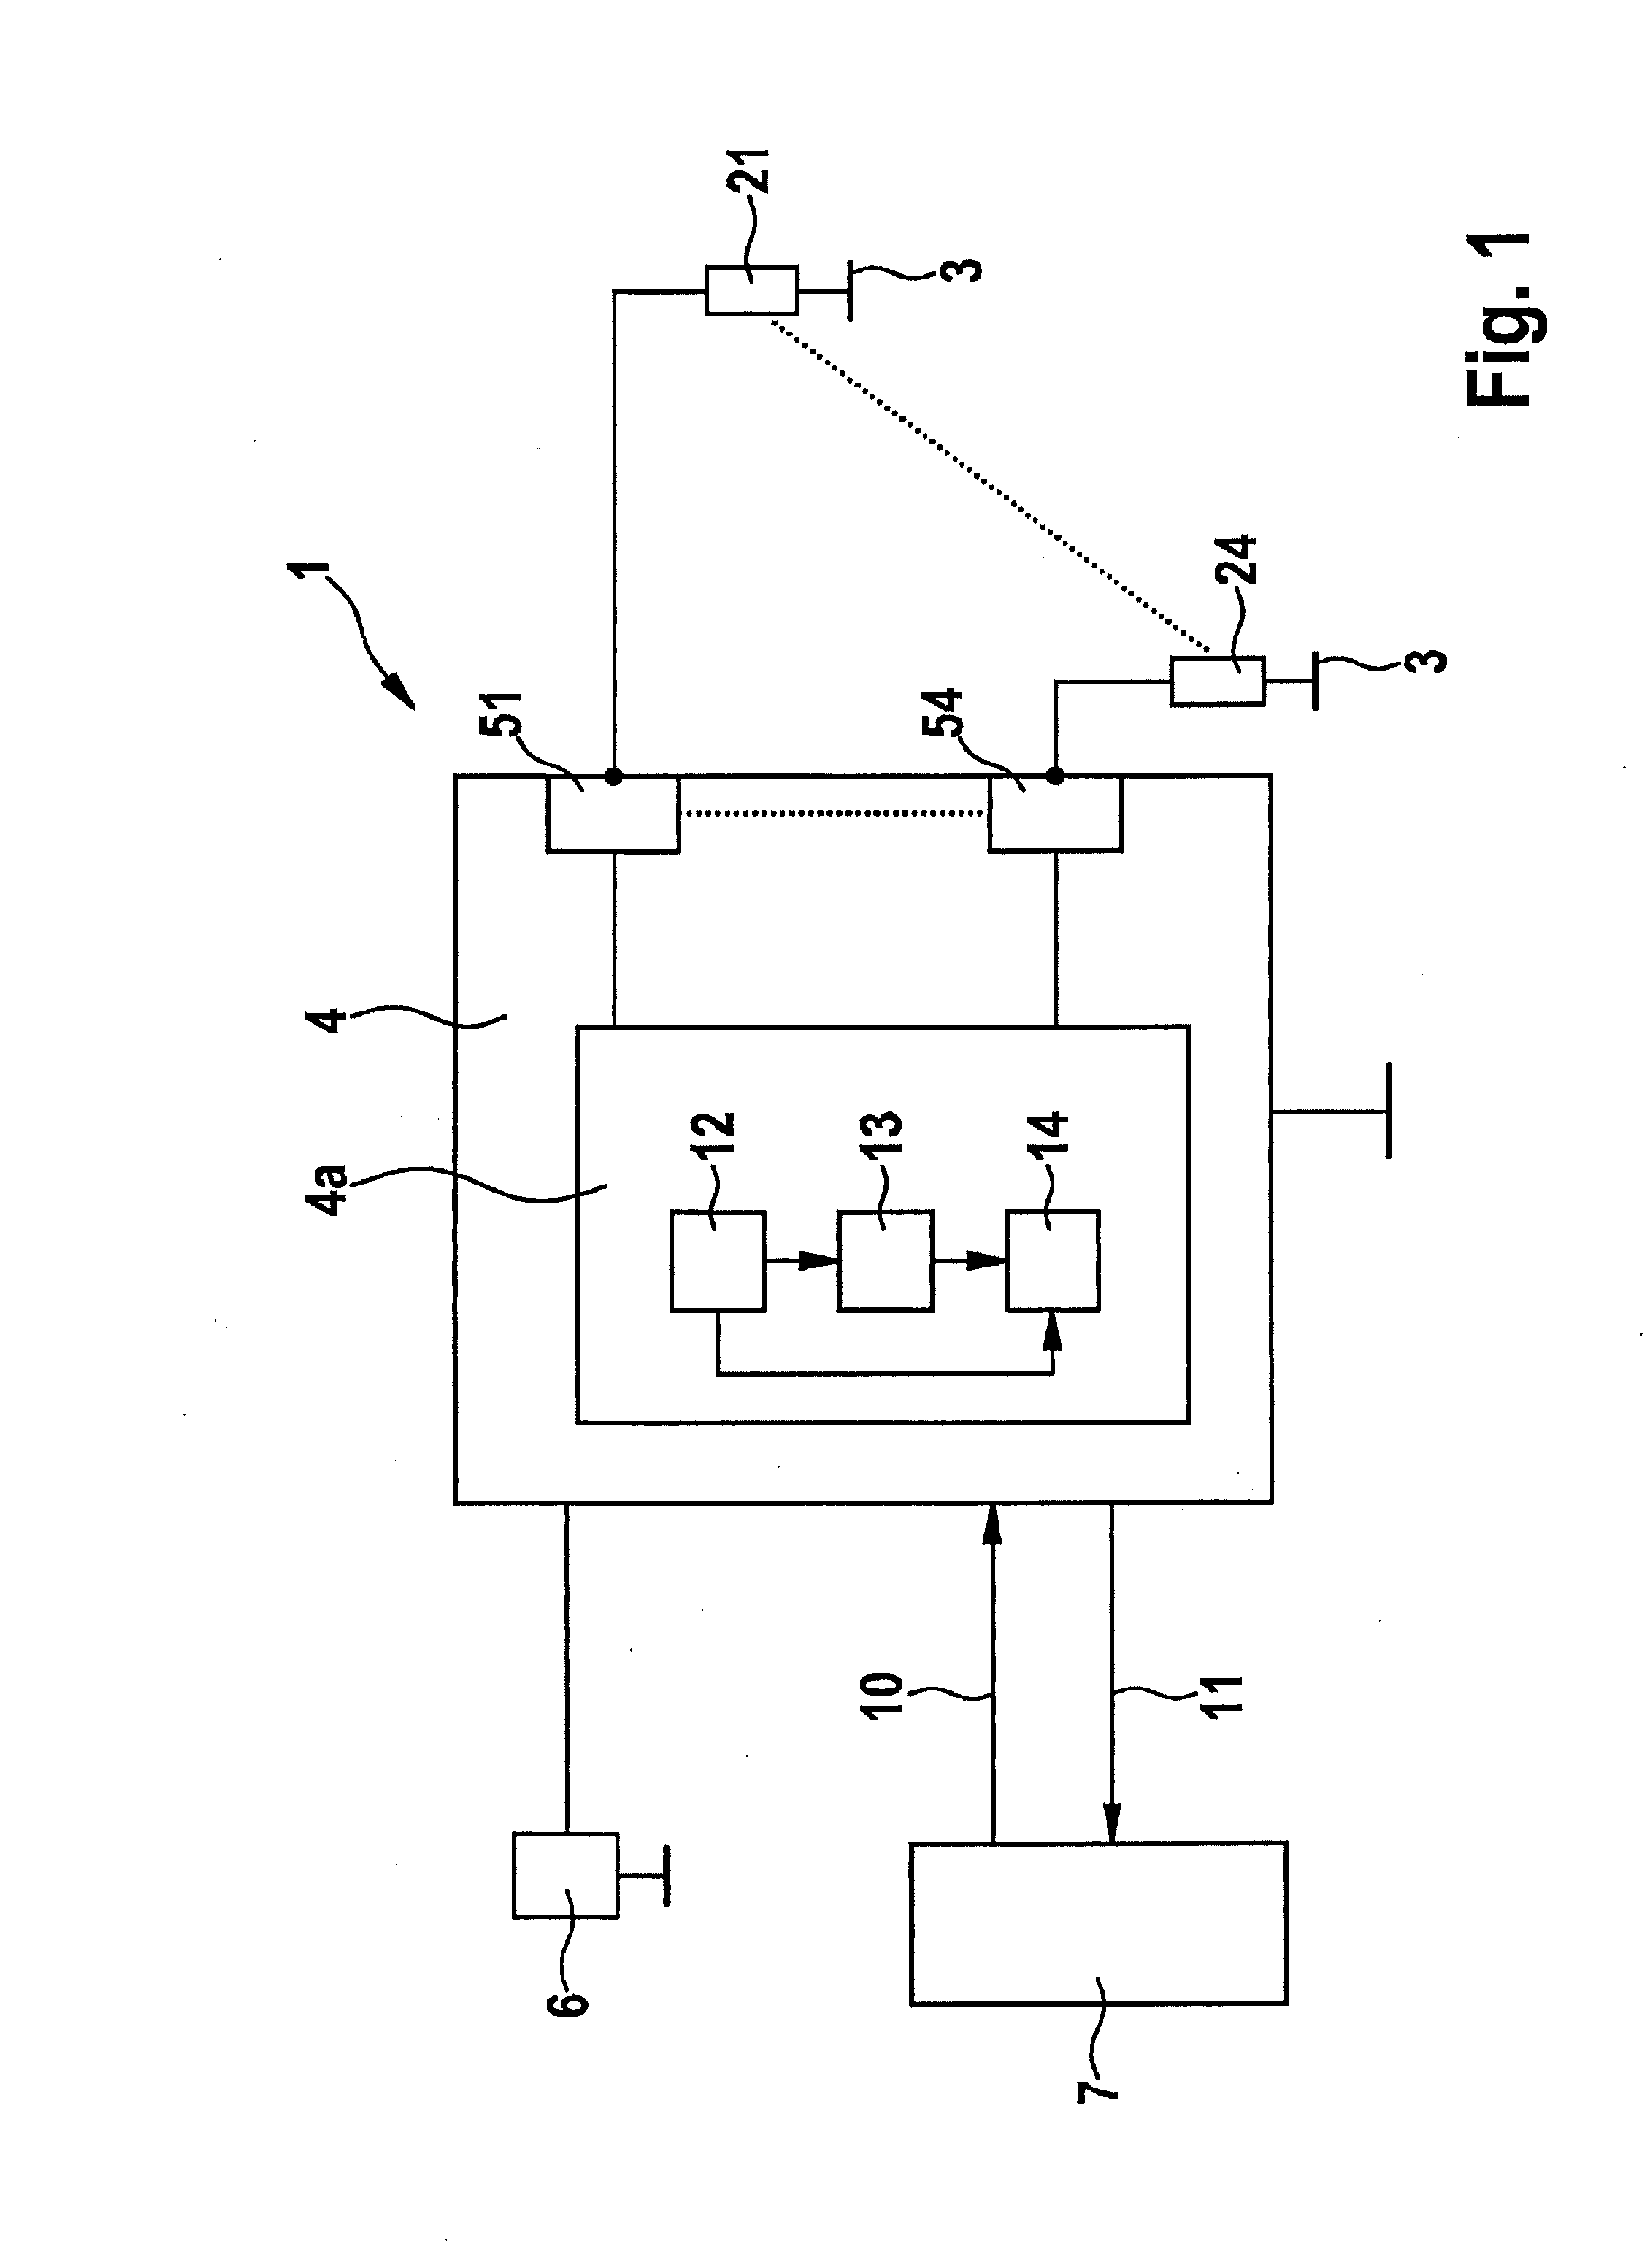 Method and device for detecting a replacement of pencil glow plugs in an internal combustion engine